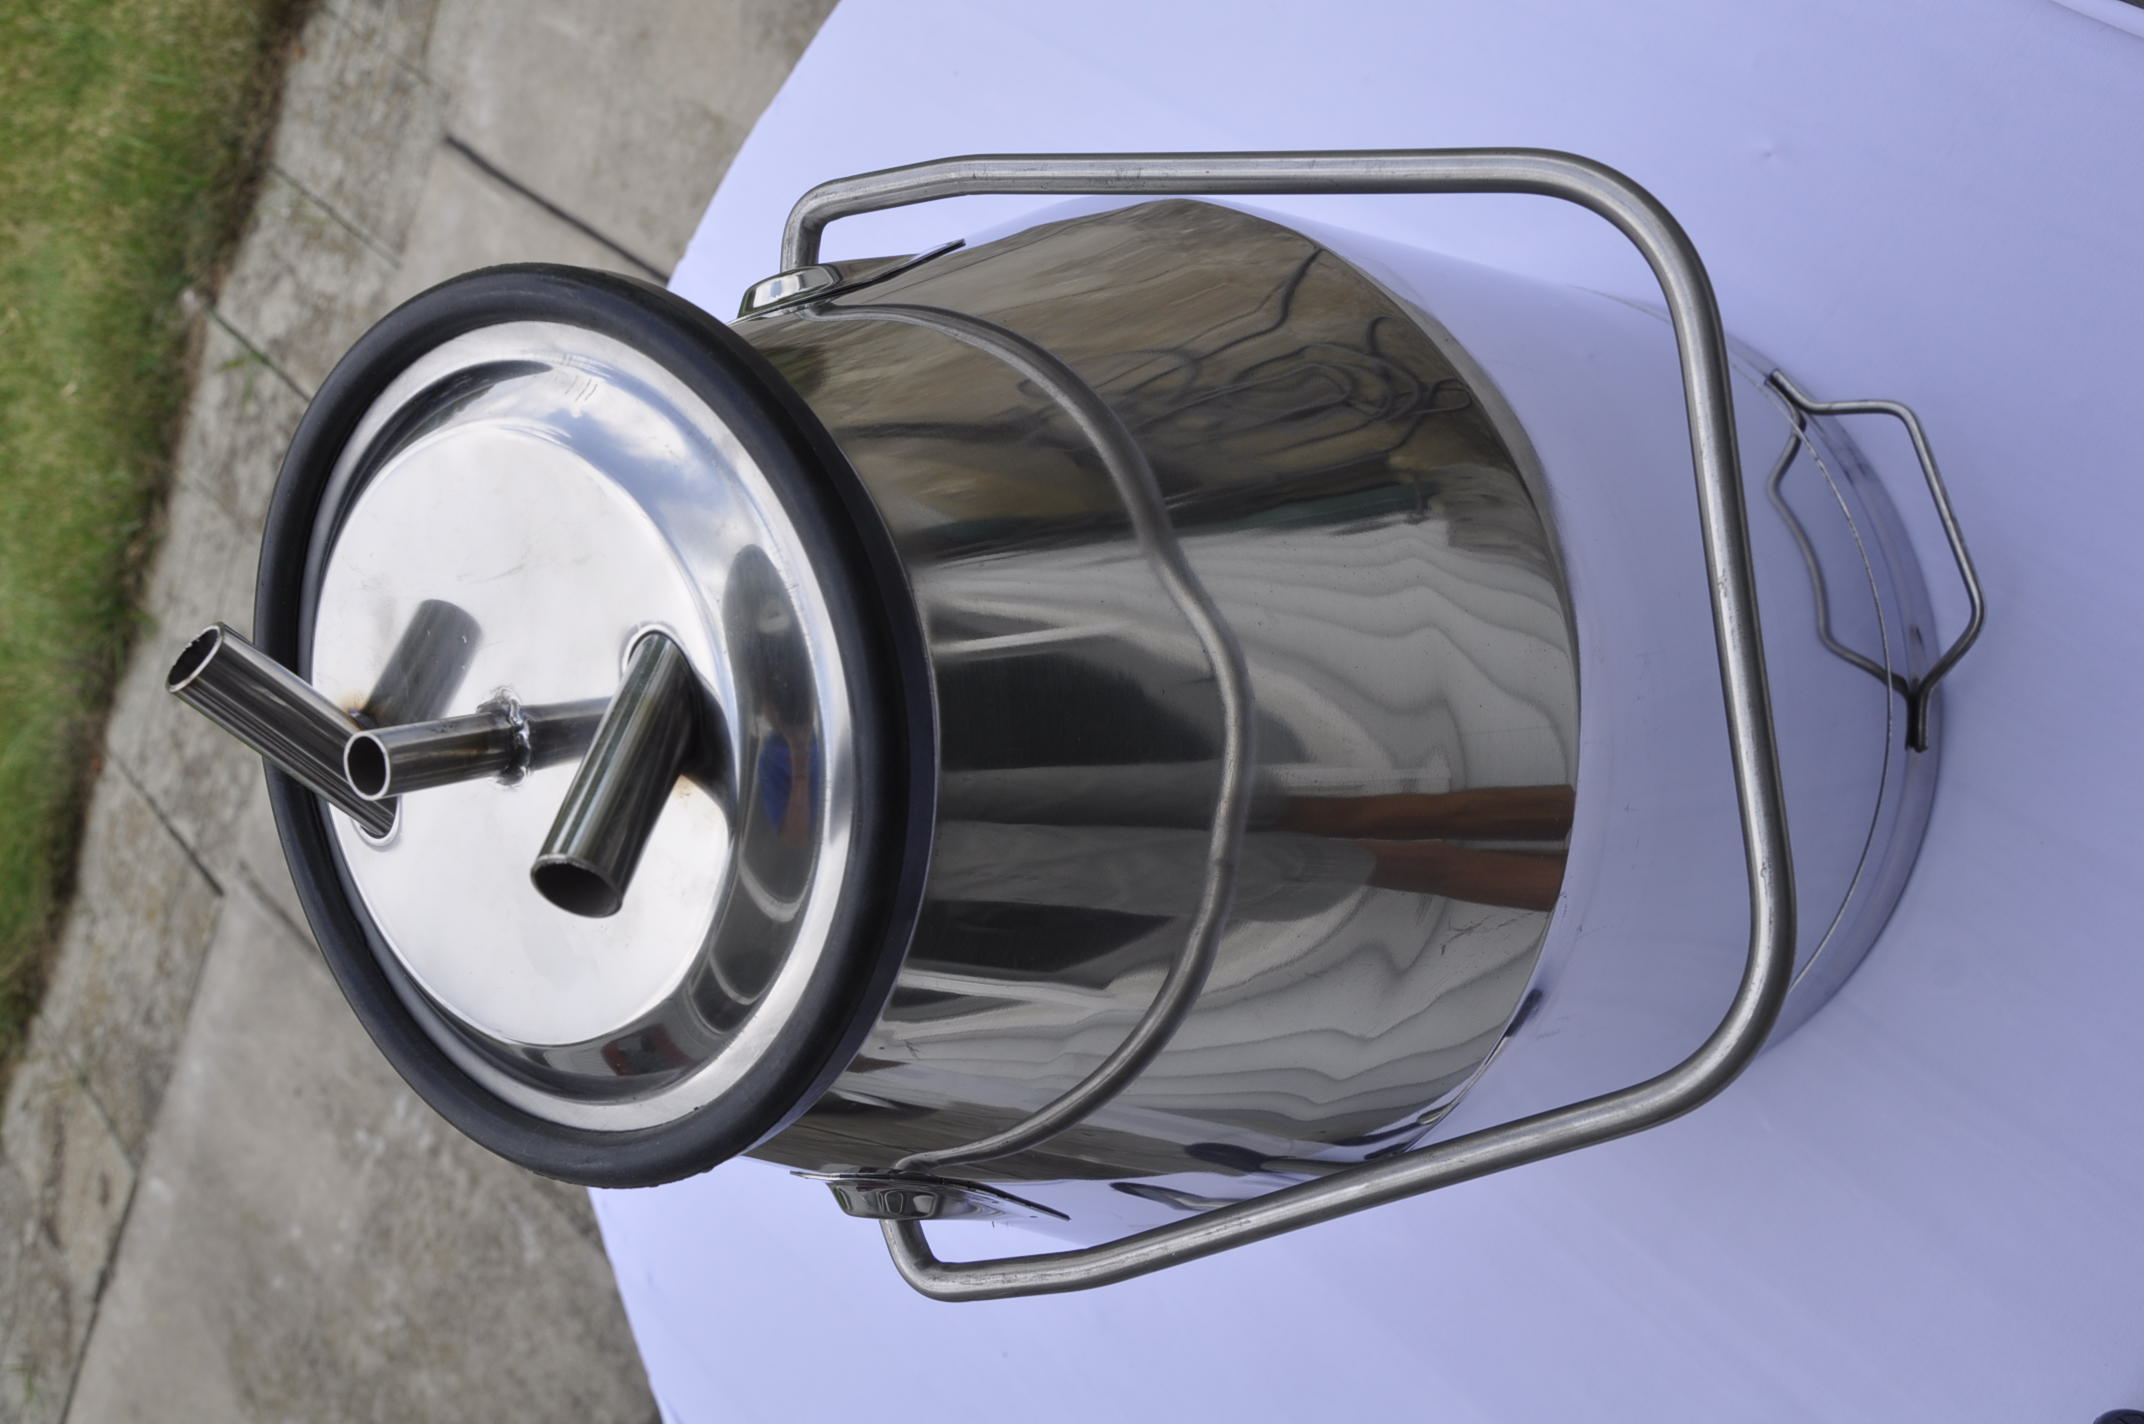 Cow Milker Bucket with lid and liner, 25 liter Made of Stainless steel 25 liter Capacity for Delaval